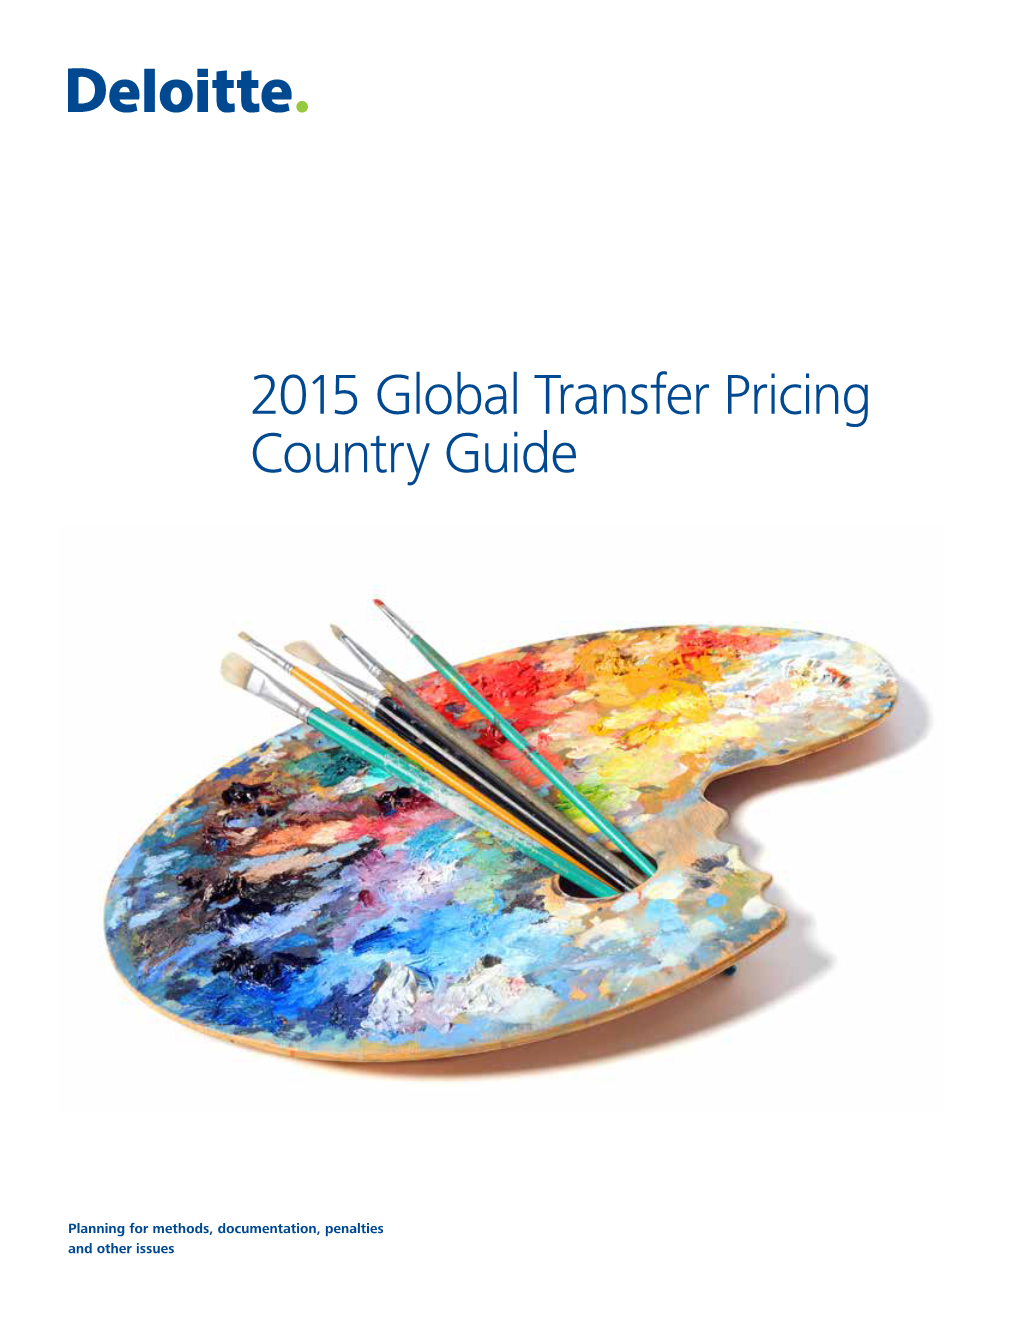 2015 Global Transfer Pricing Country Guide Download the Report